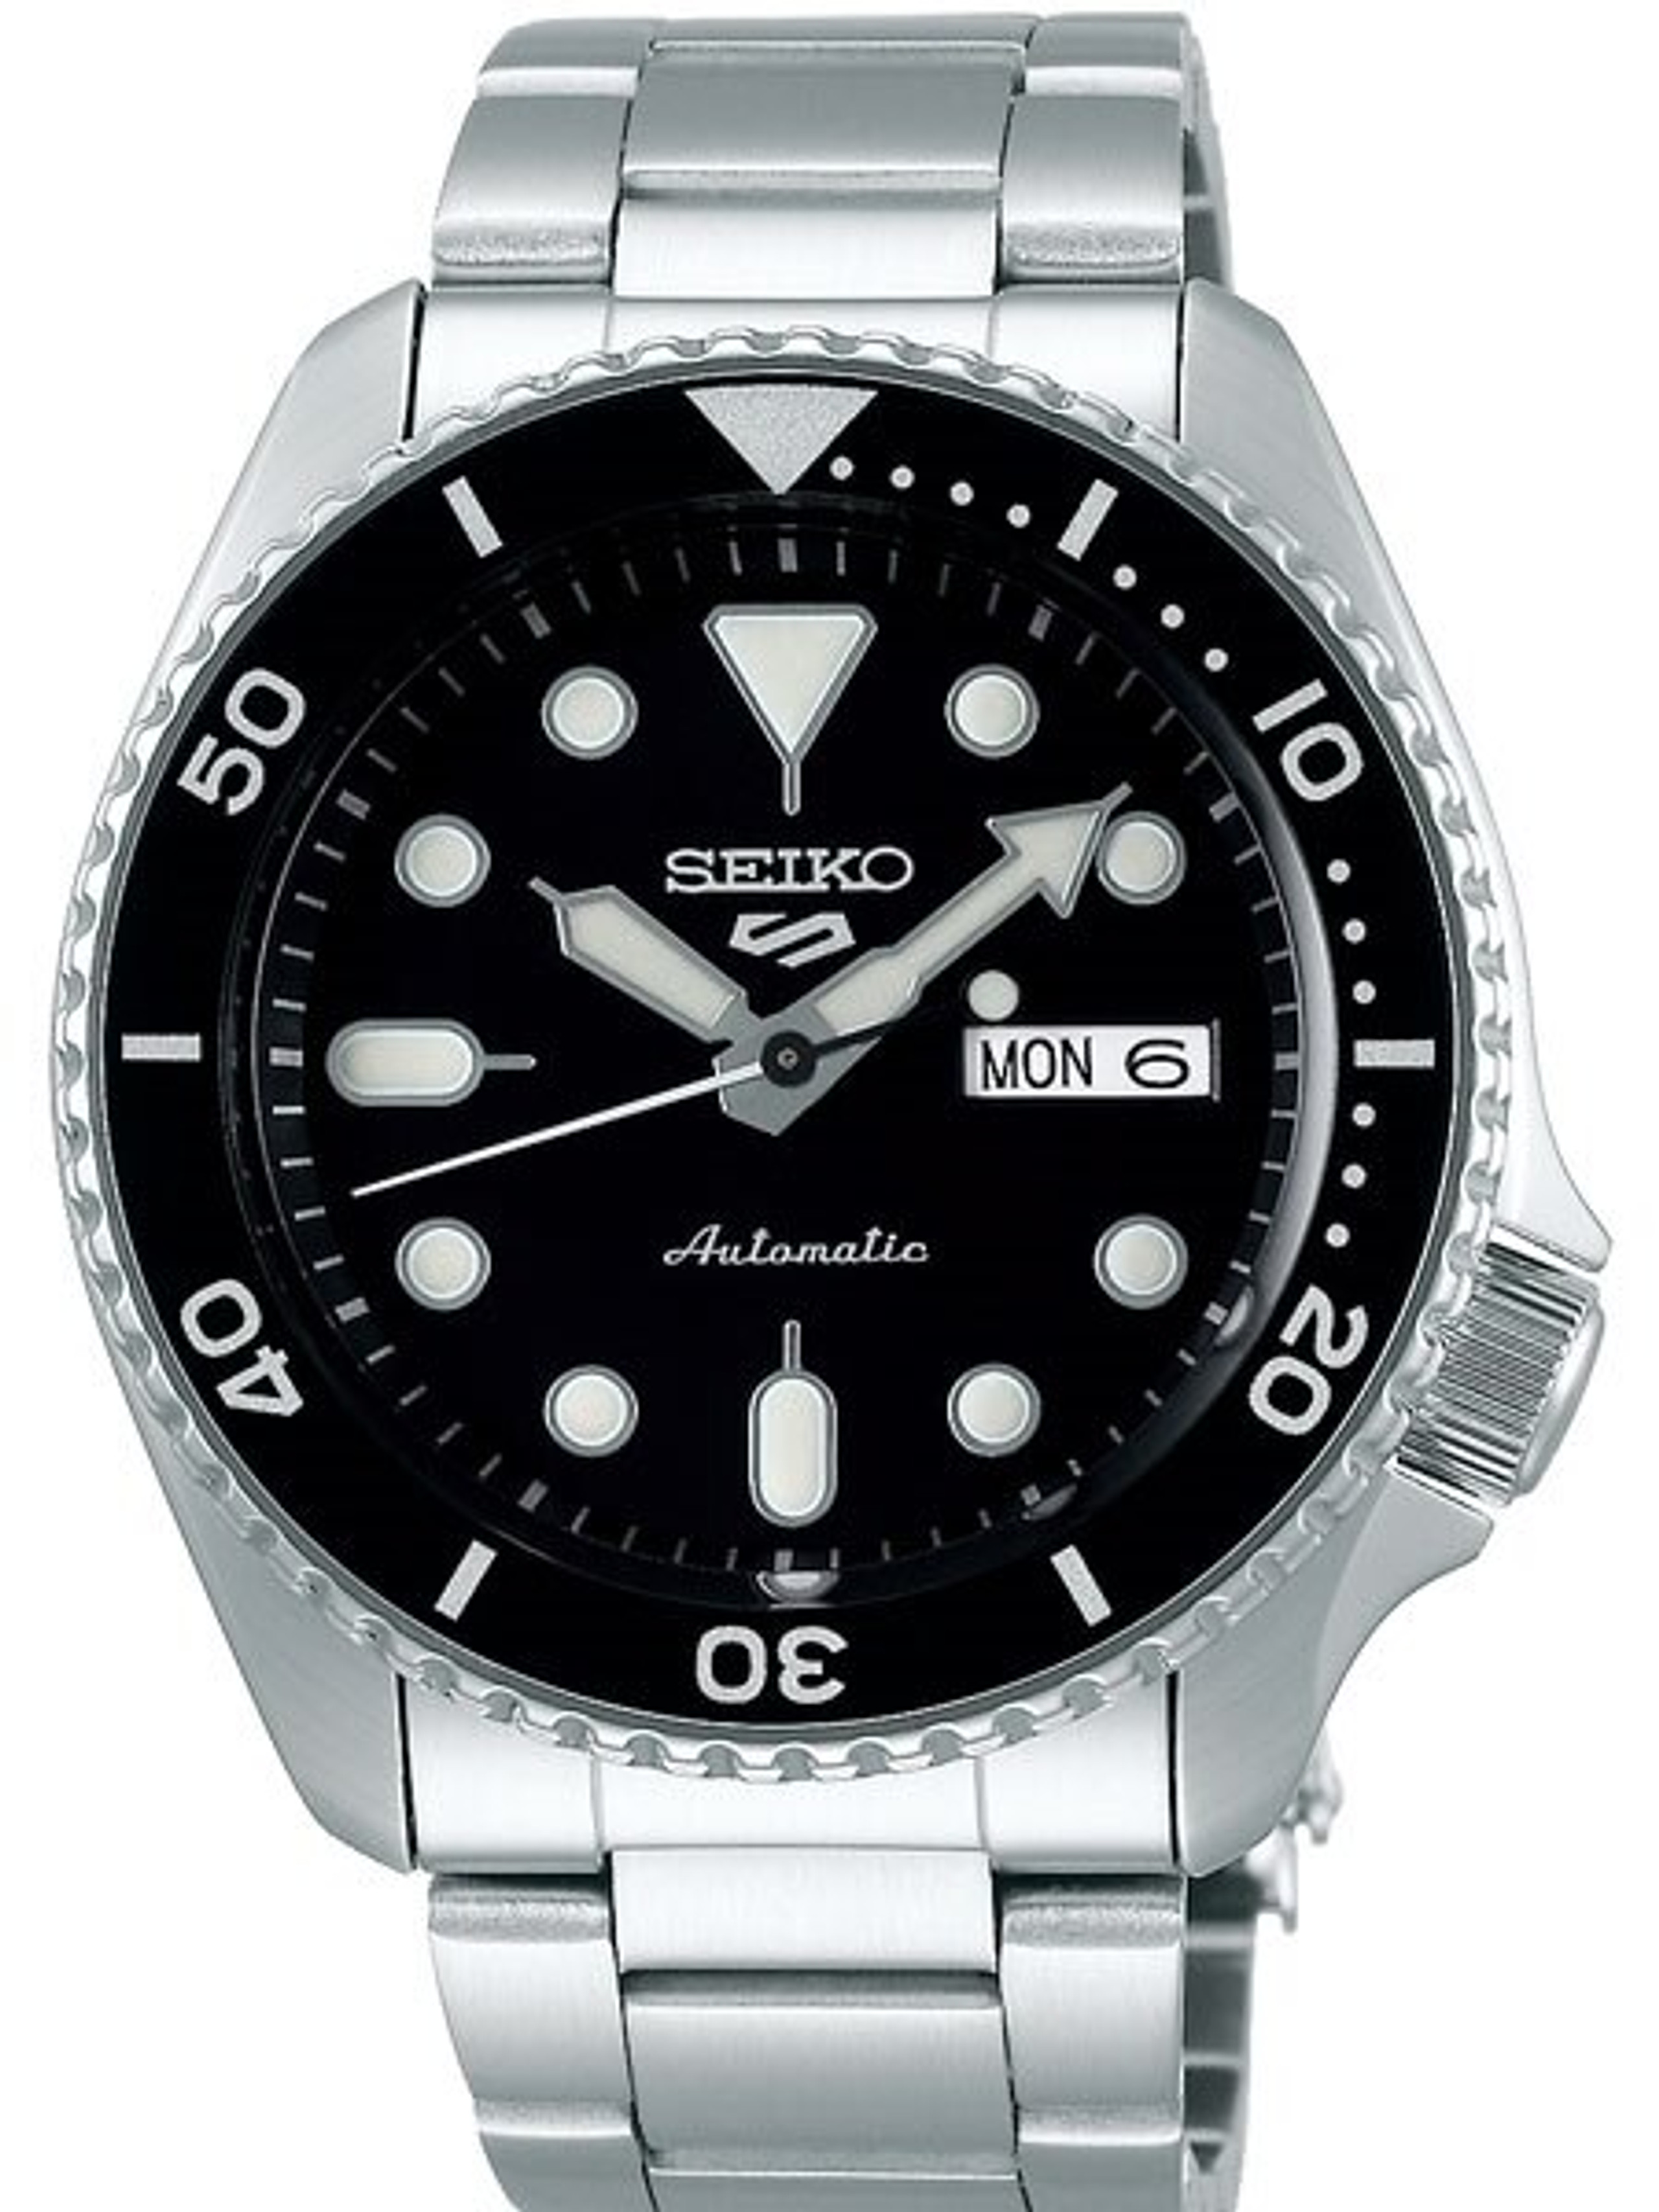 Seiko 5 Sports Automatic 24-Jewel Watch with Black Dial #SRPD55